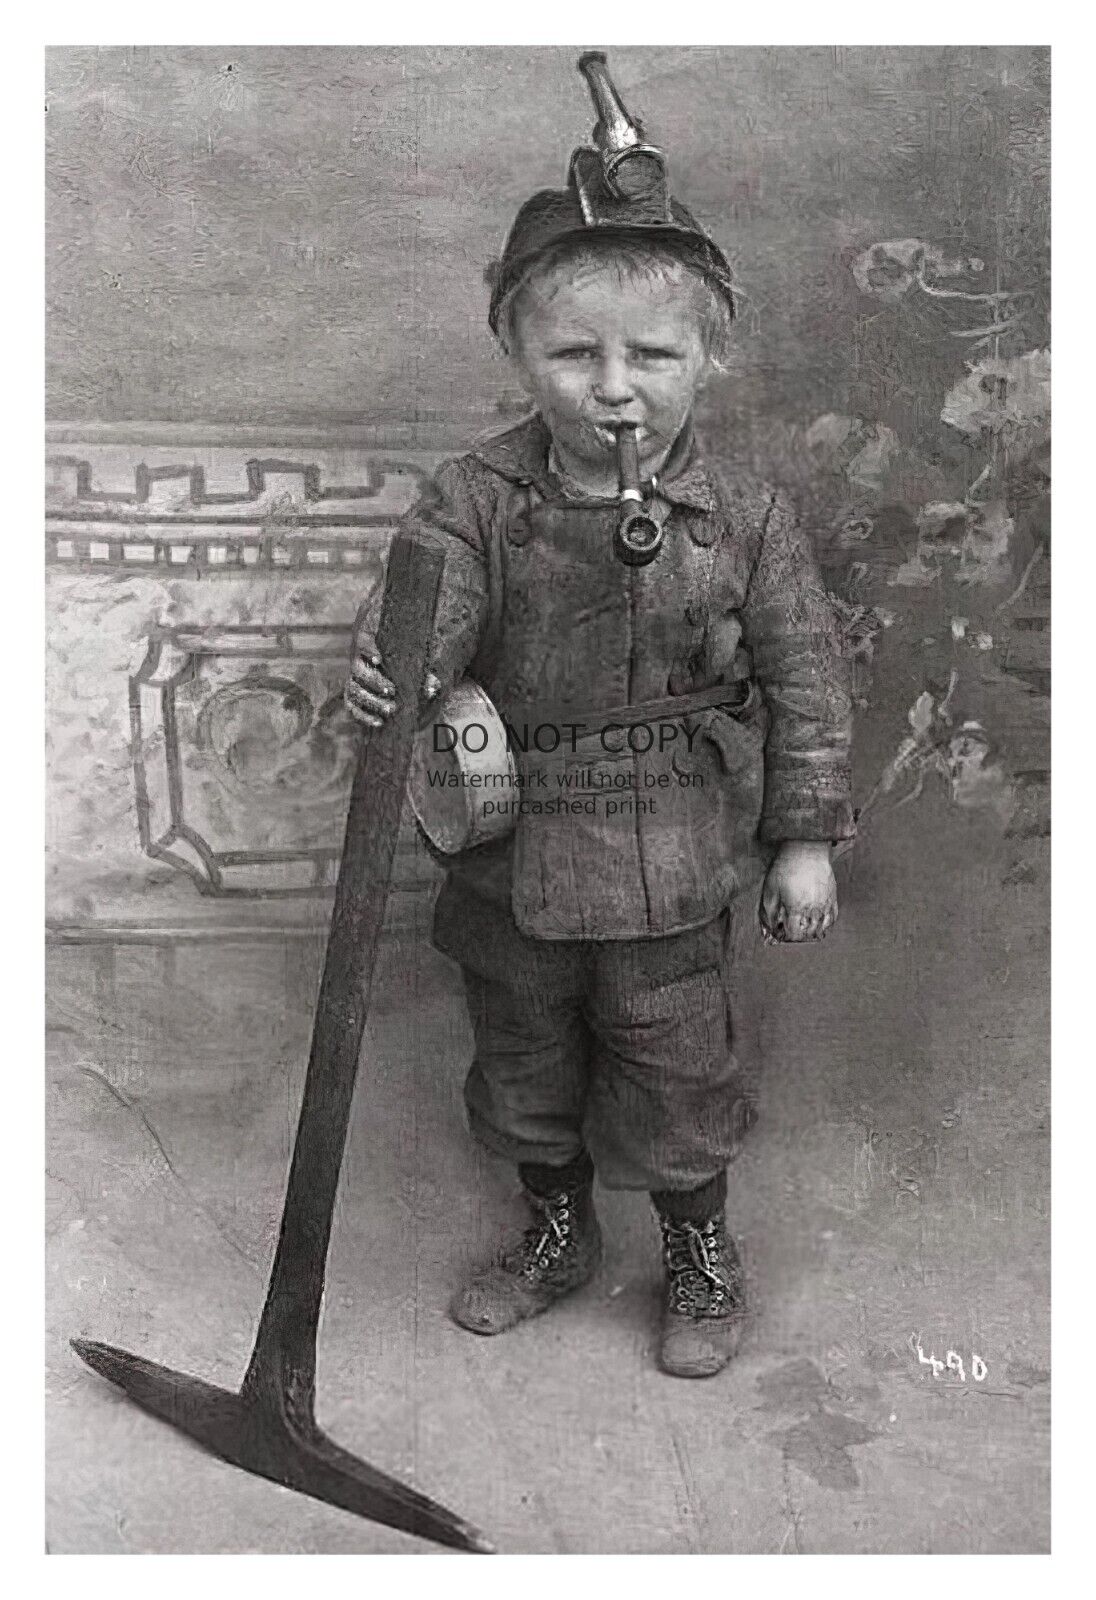 CHILD COAL MINER 8 YRS OLD SMOKING PIPE HOLDING PICKAXE FREAK 4X6 PHOTO POSTCARD